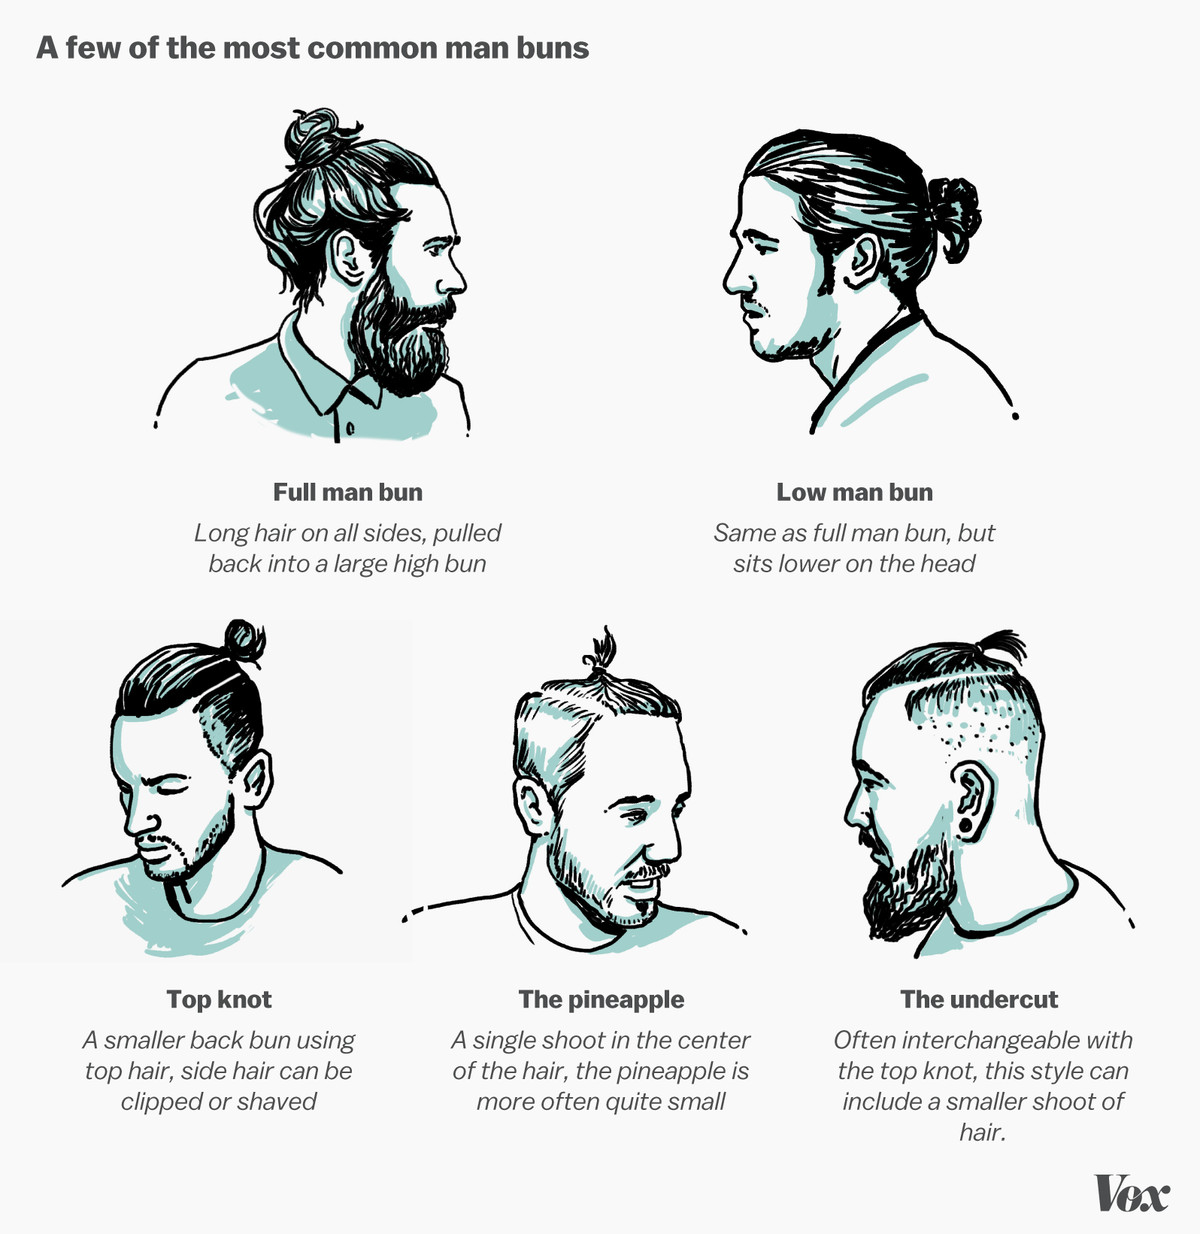 A few of the most common man buns